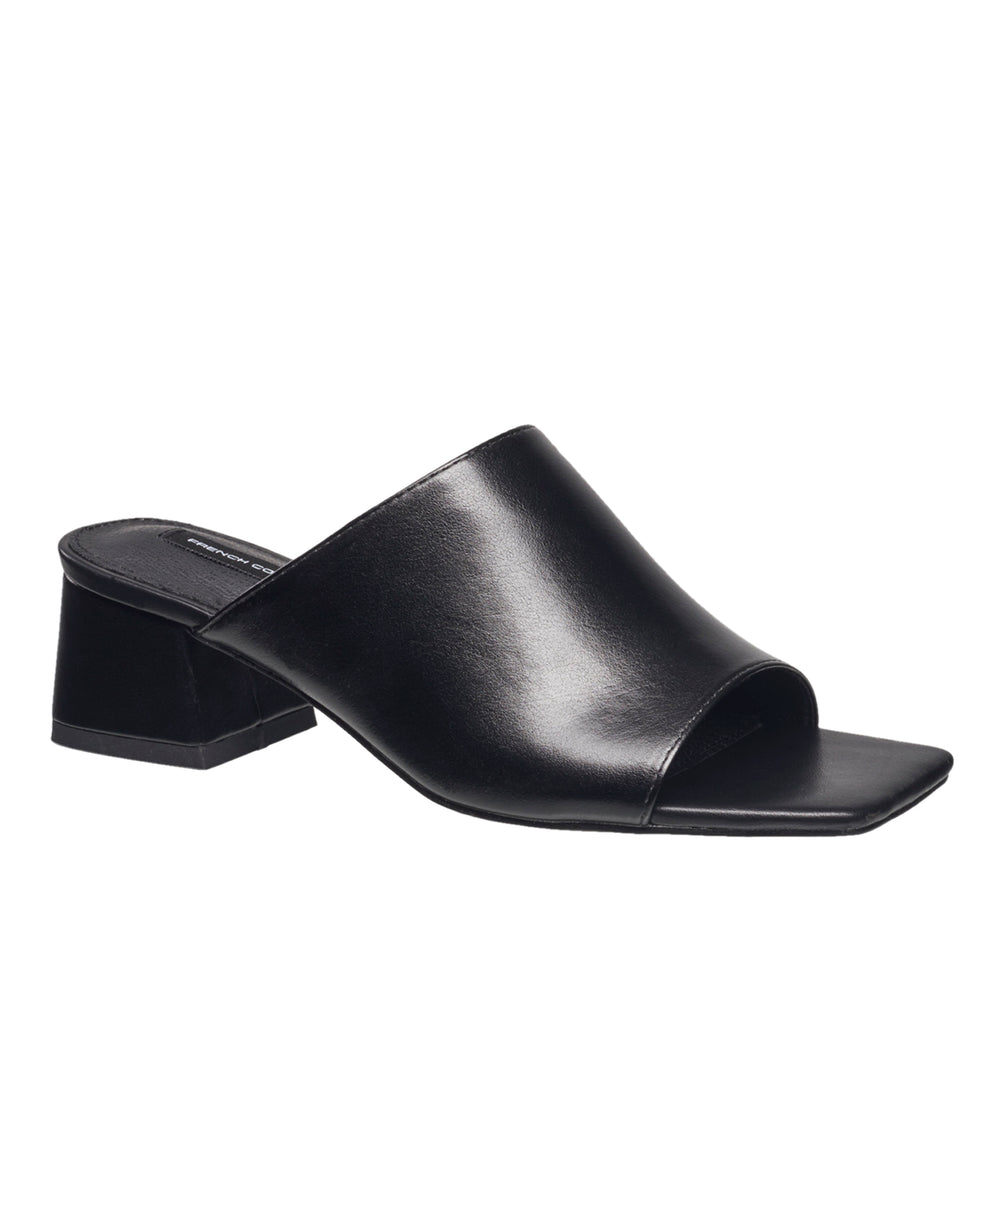 Dinner Slip On Mule Black | French Connection US